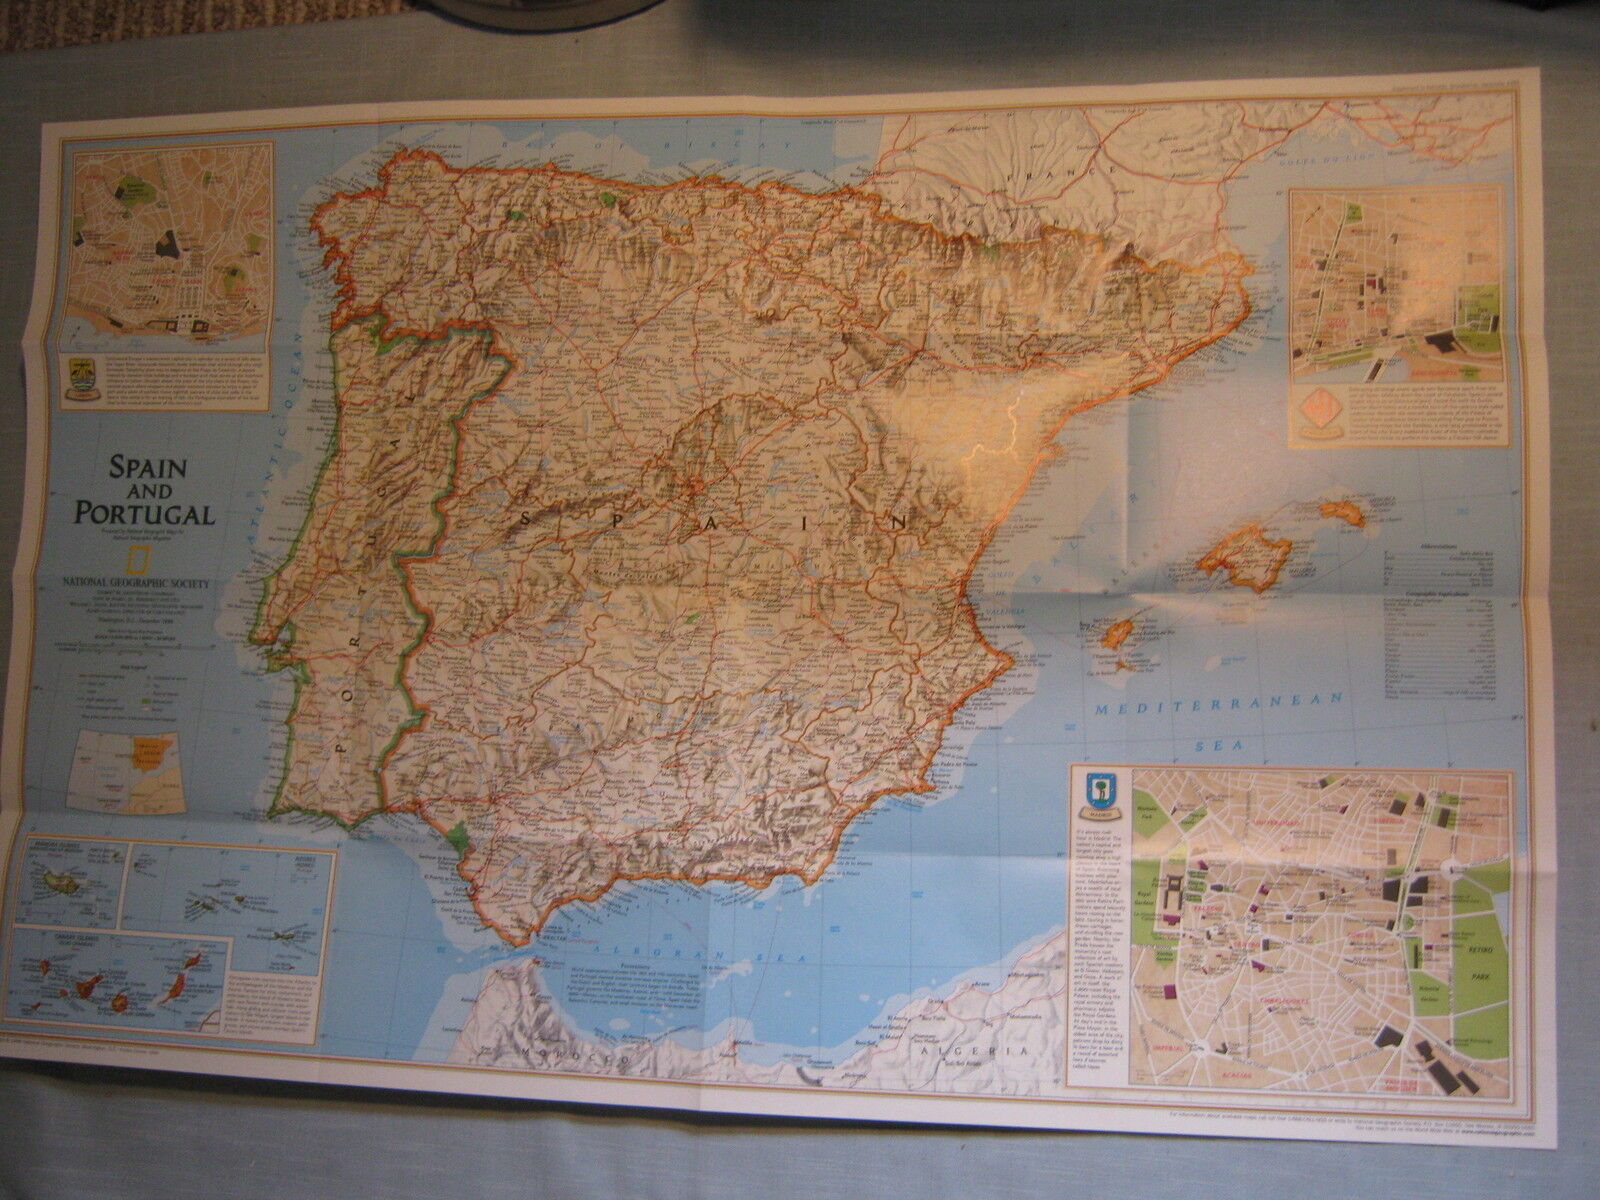 A TRAVELER'S MAP OF SPAIN AND PORTUGAL  National Geographic December 1998 